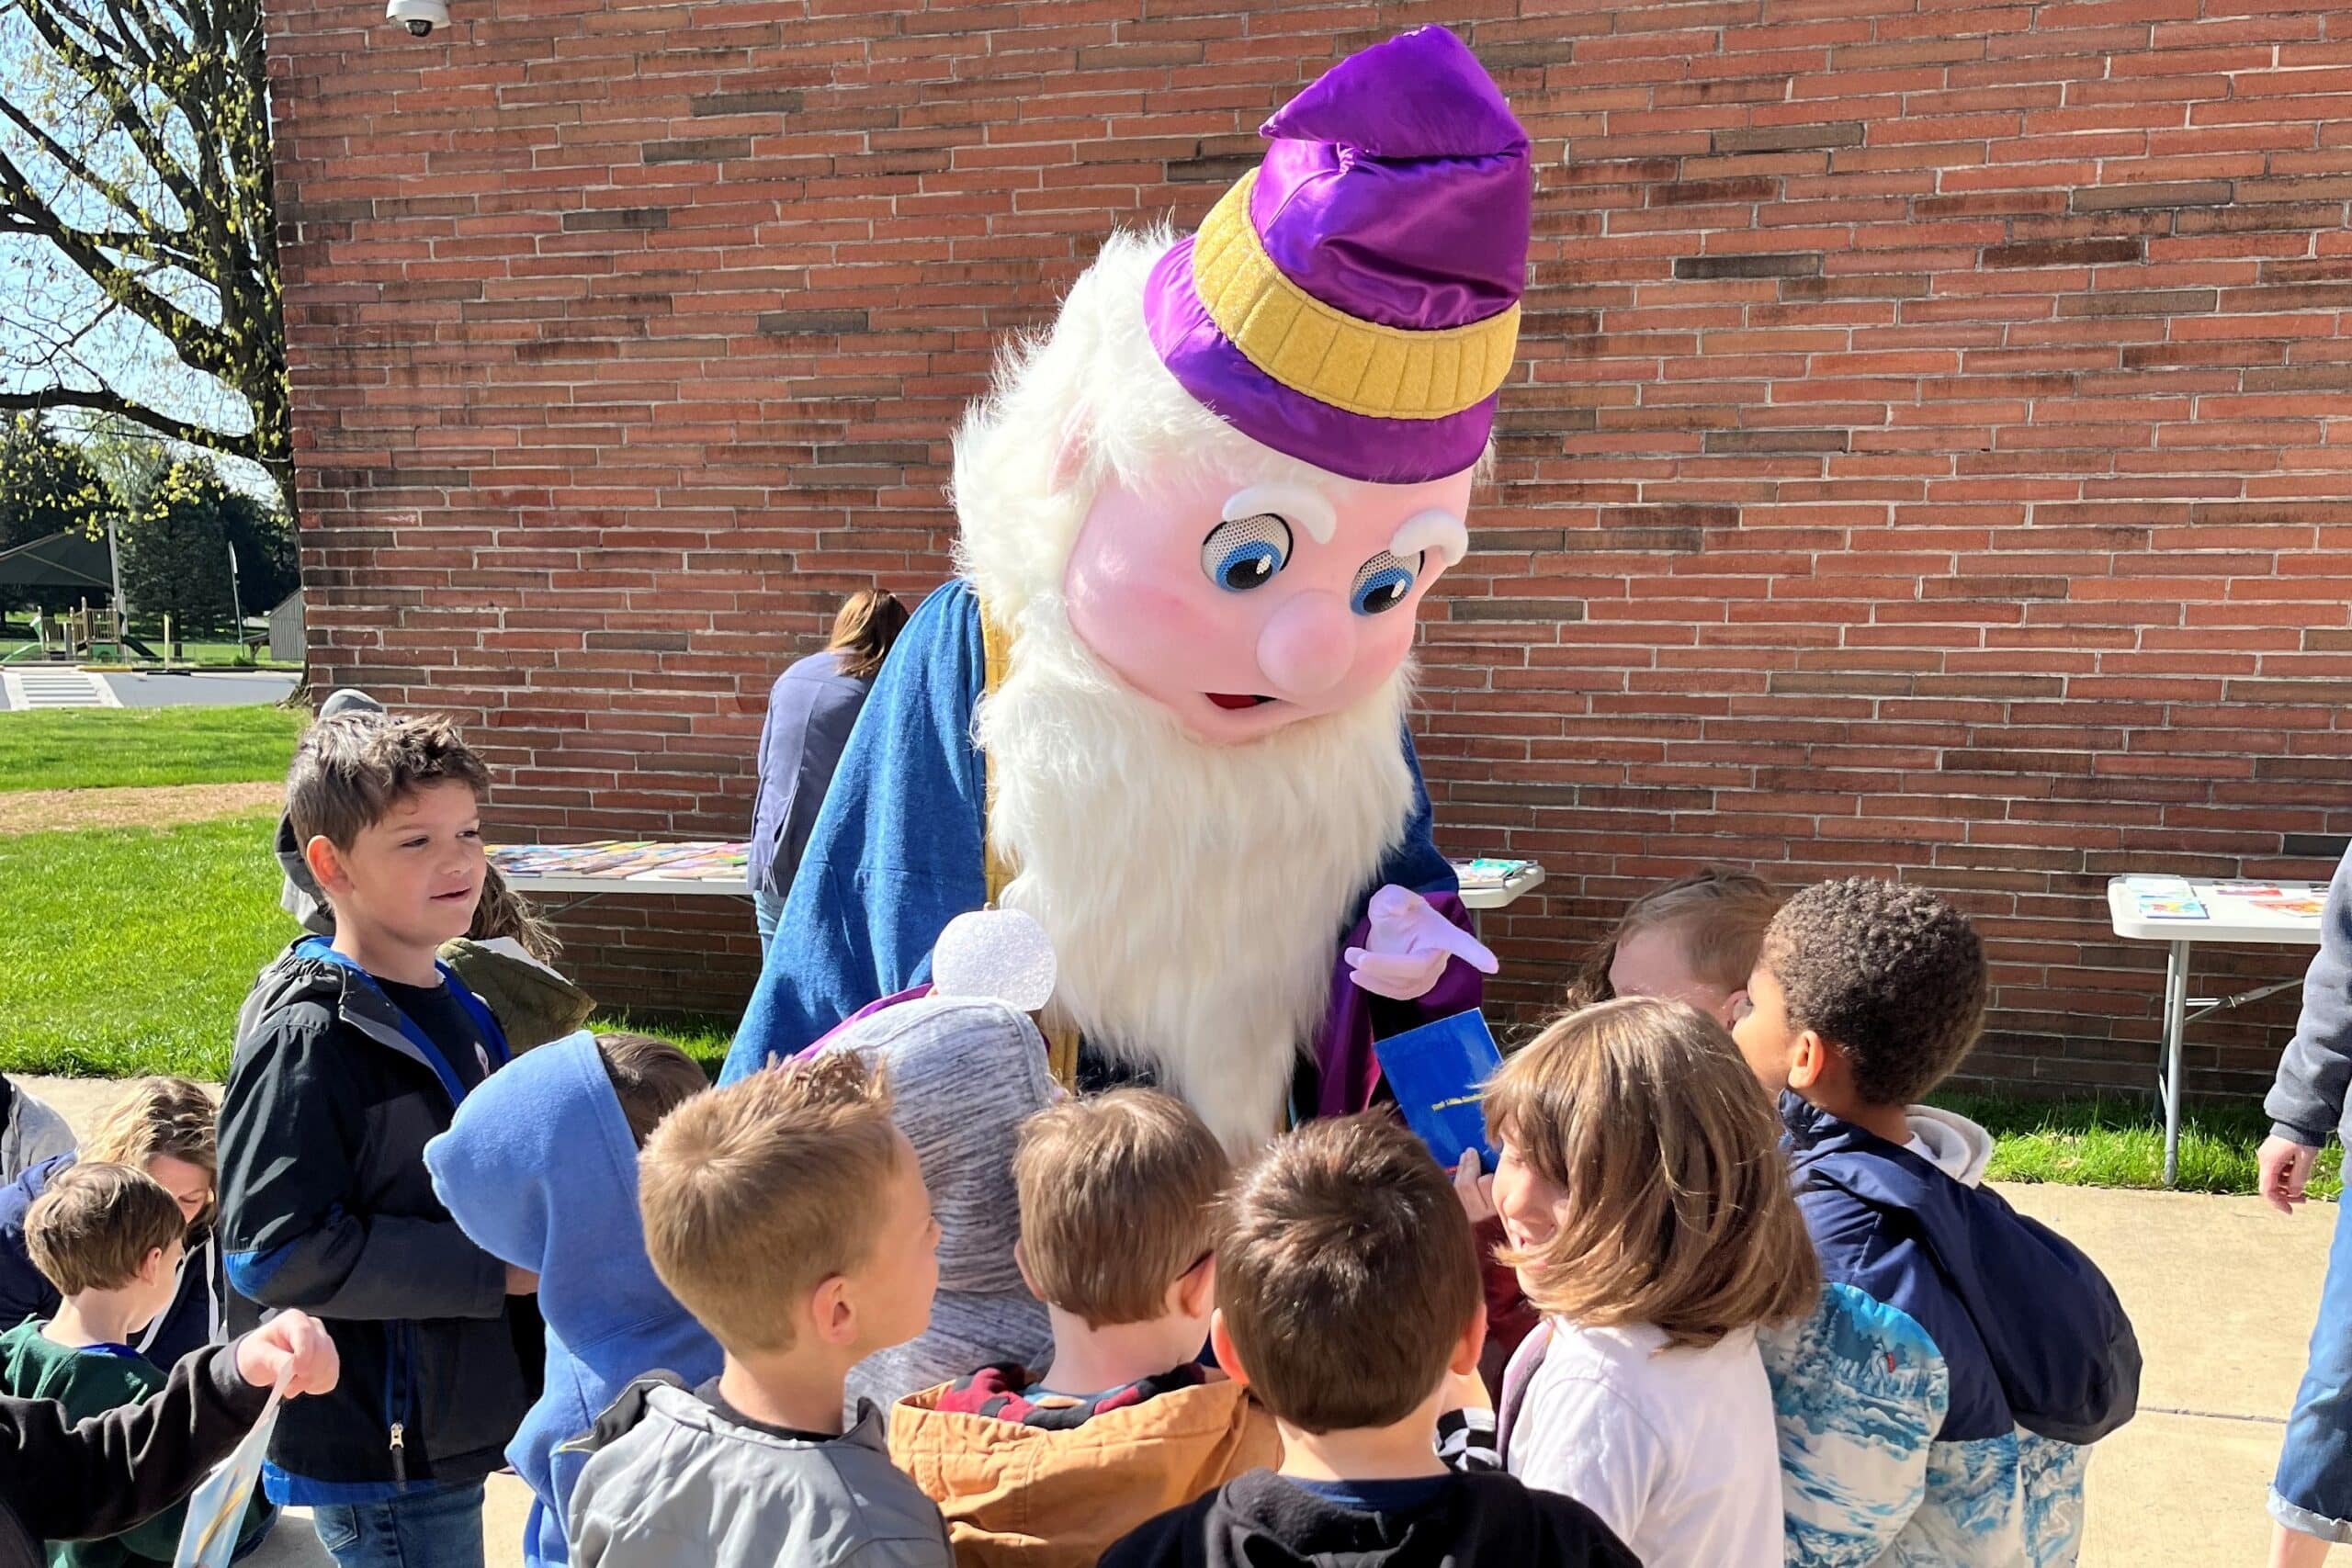 The Reading Wizard mascot talking to students